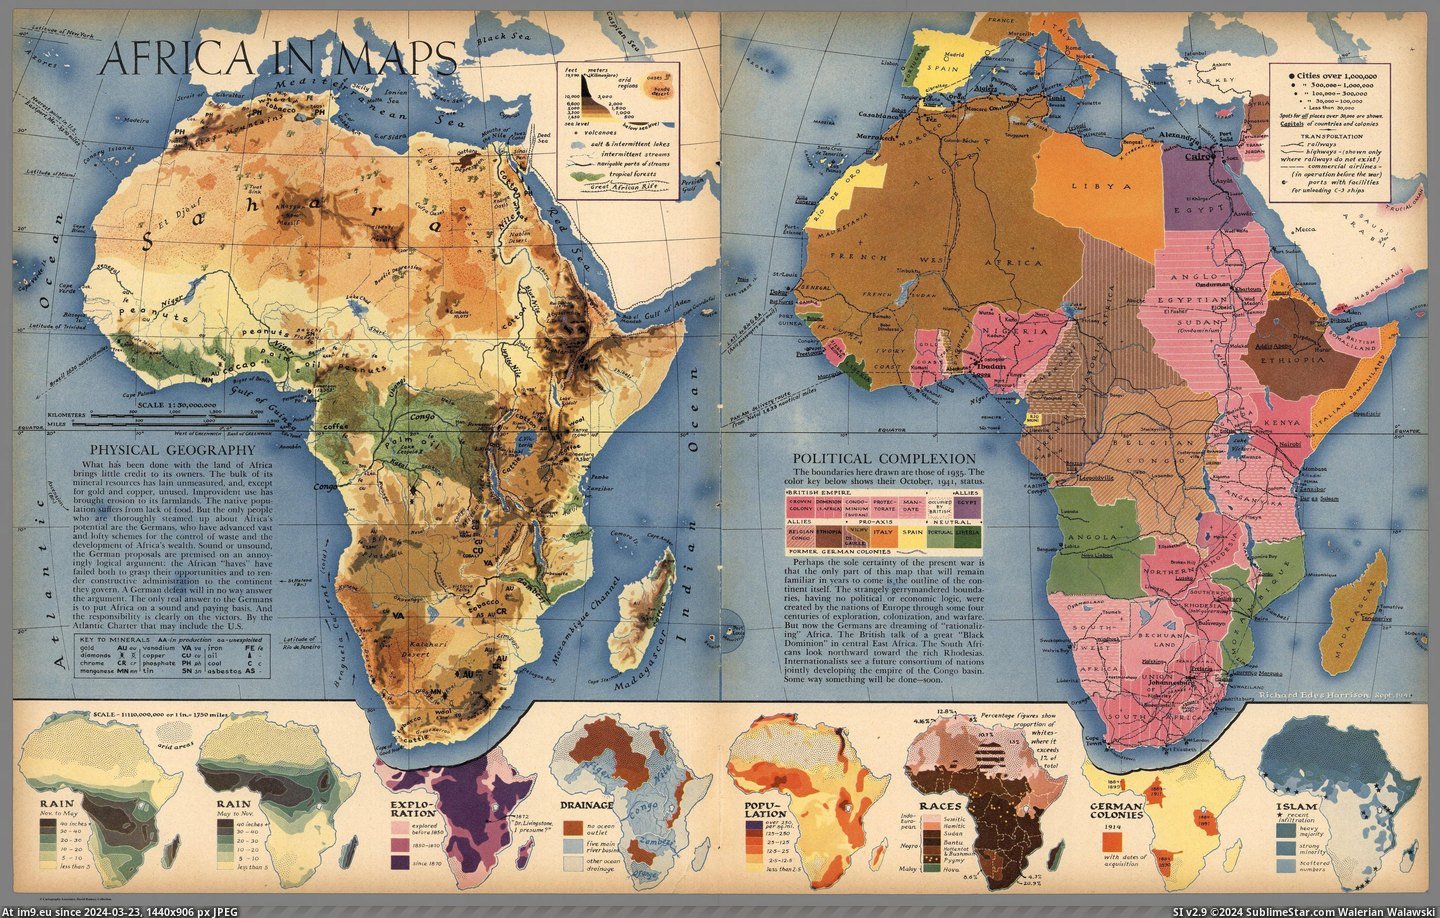 #Africa #Maps #Harrison #Sept #Richard [Mapporn] Africa in Maps, made by Richard Edes Harrison, Sept. 1941 [5089x3214] Pic. (Image of album My r/MAPS favs))